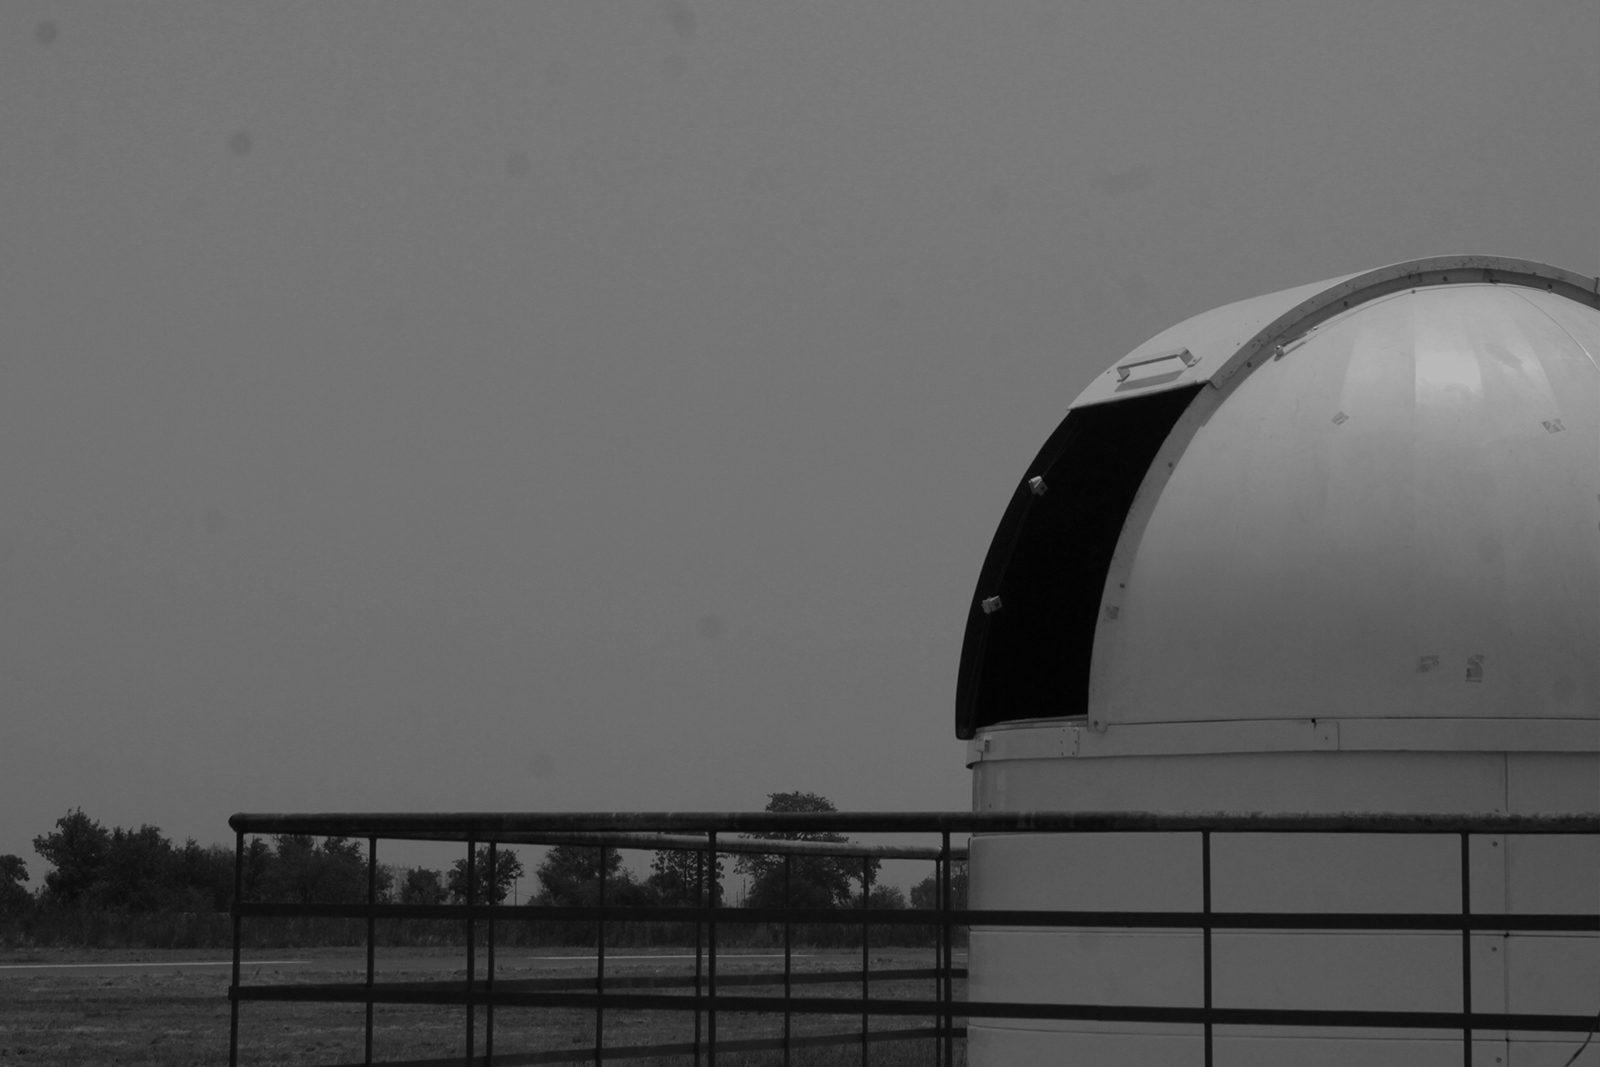 Observatory for Amateur Astronomical Research